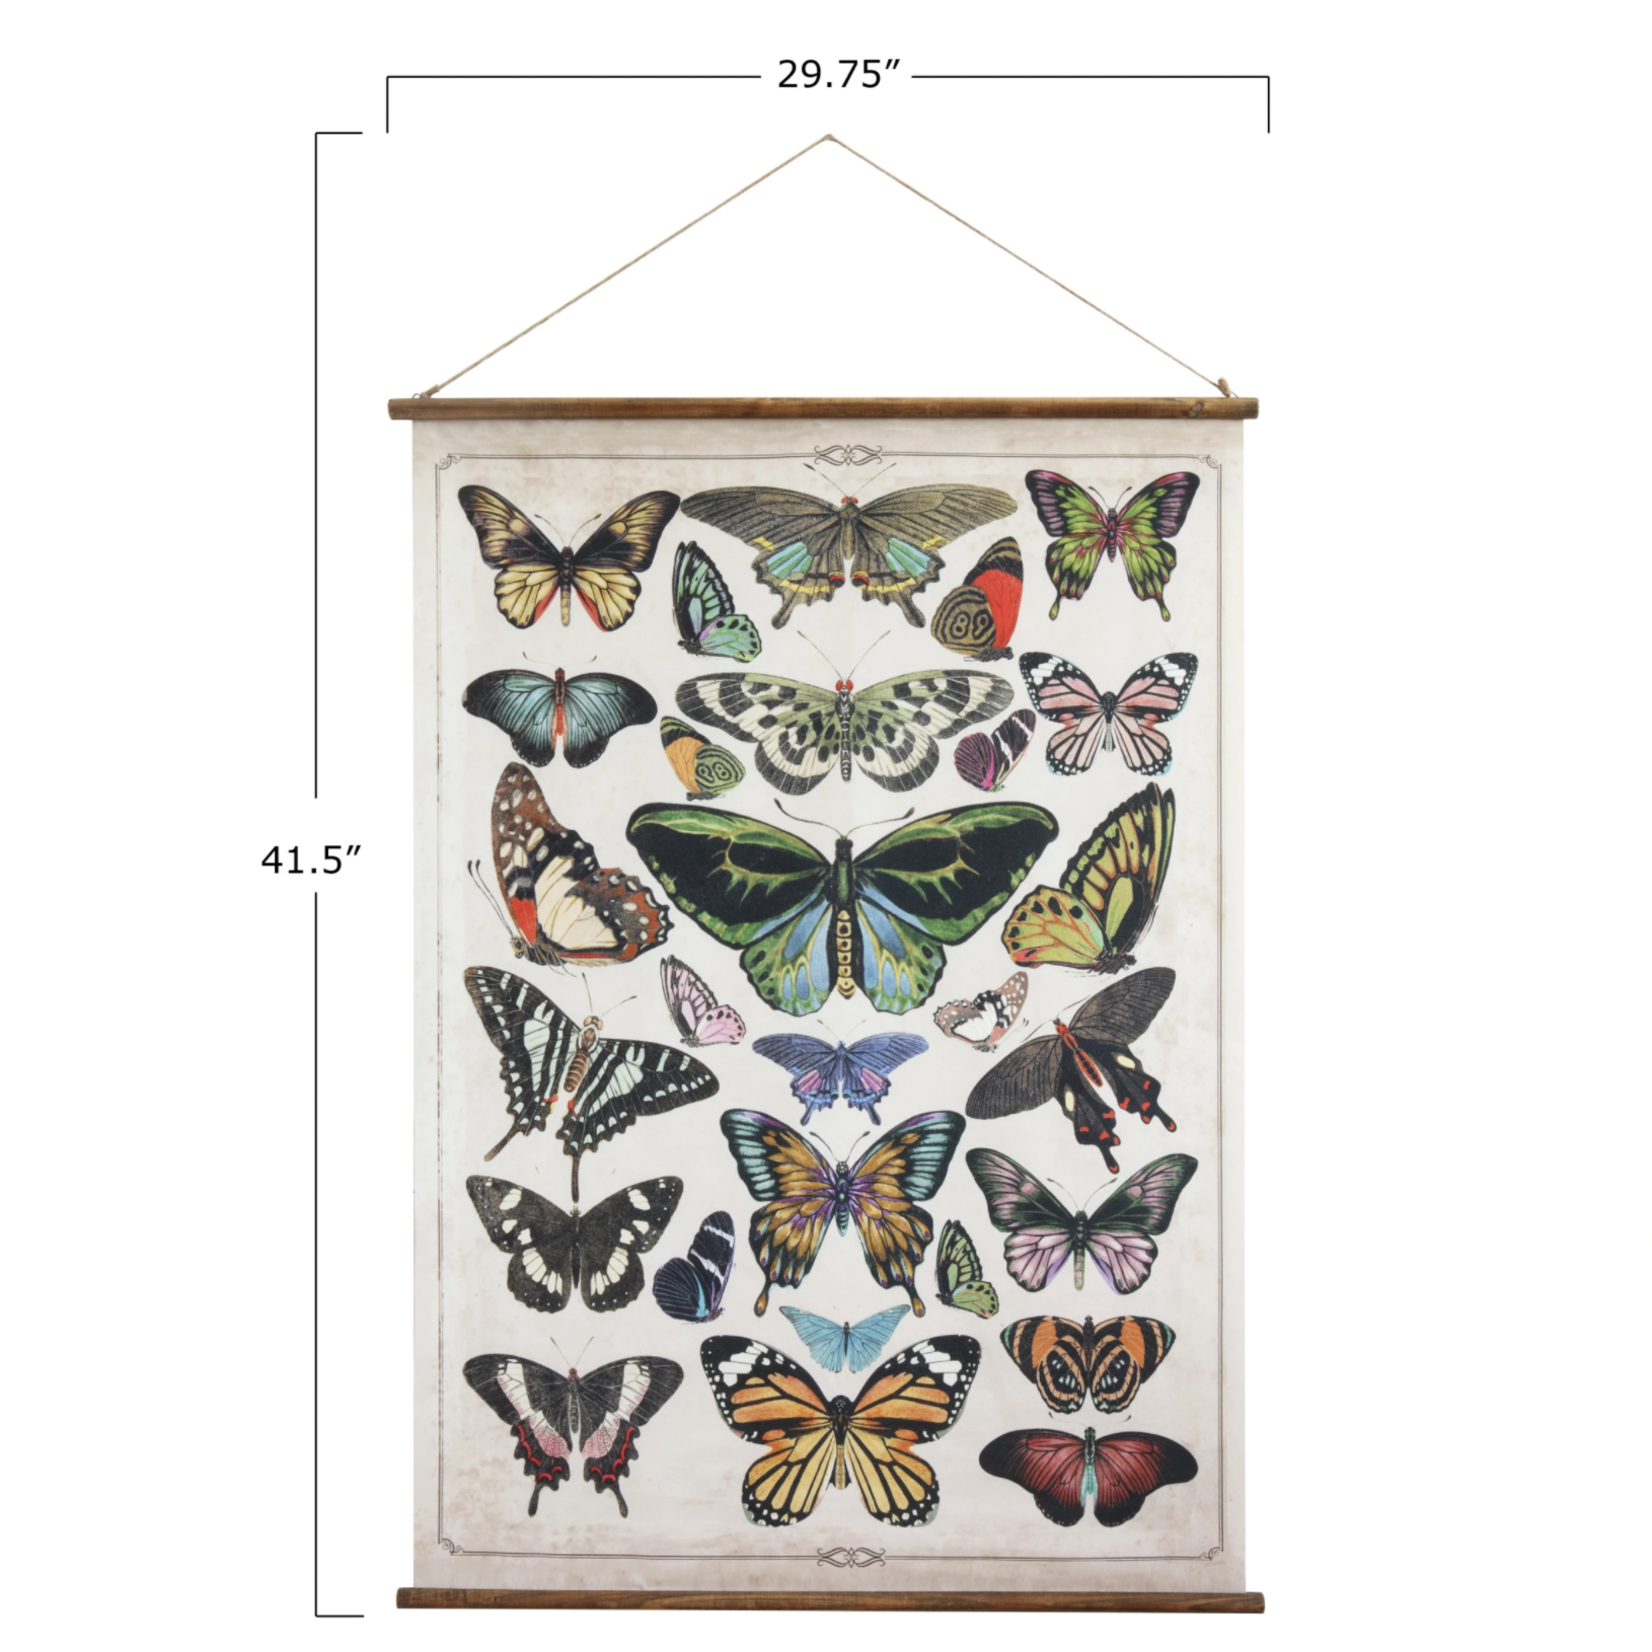 Butterfly Scroll Wall Hanging, 40"w x 42.5"h